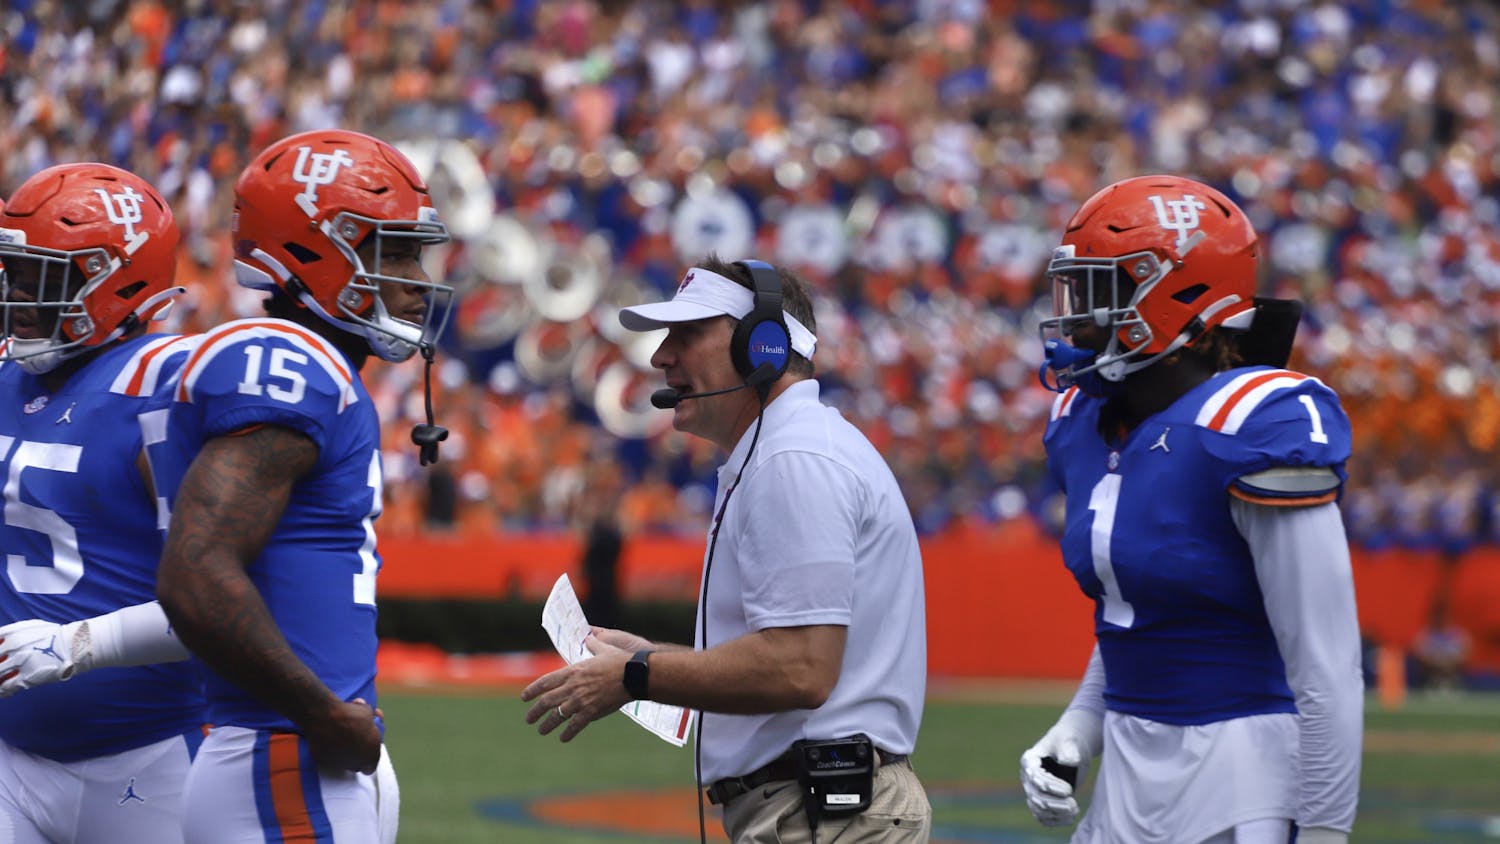 Florida head coach Dan Mullen on the sideline with Anthony Richardson (15) and Brenton Cox Jr. (1) during Florida's Oct. 16 game against Vanderbilt.